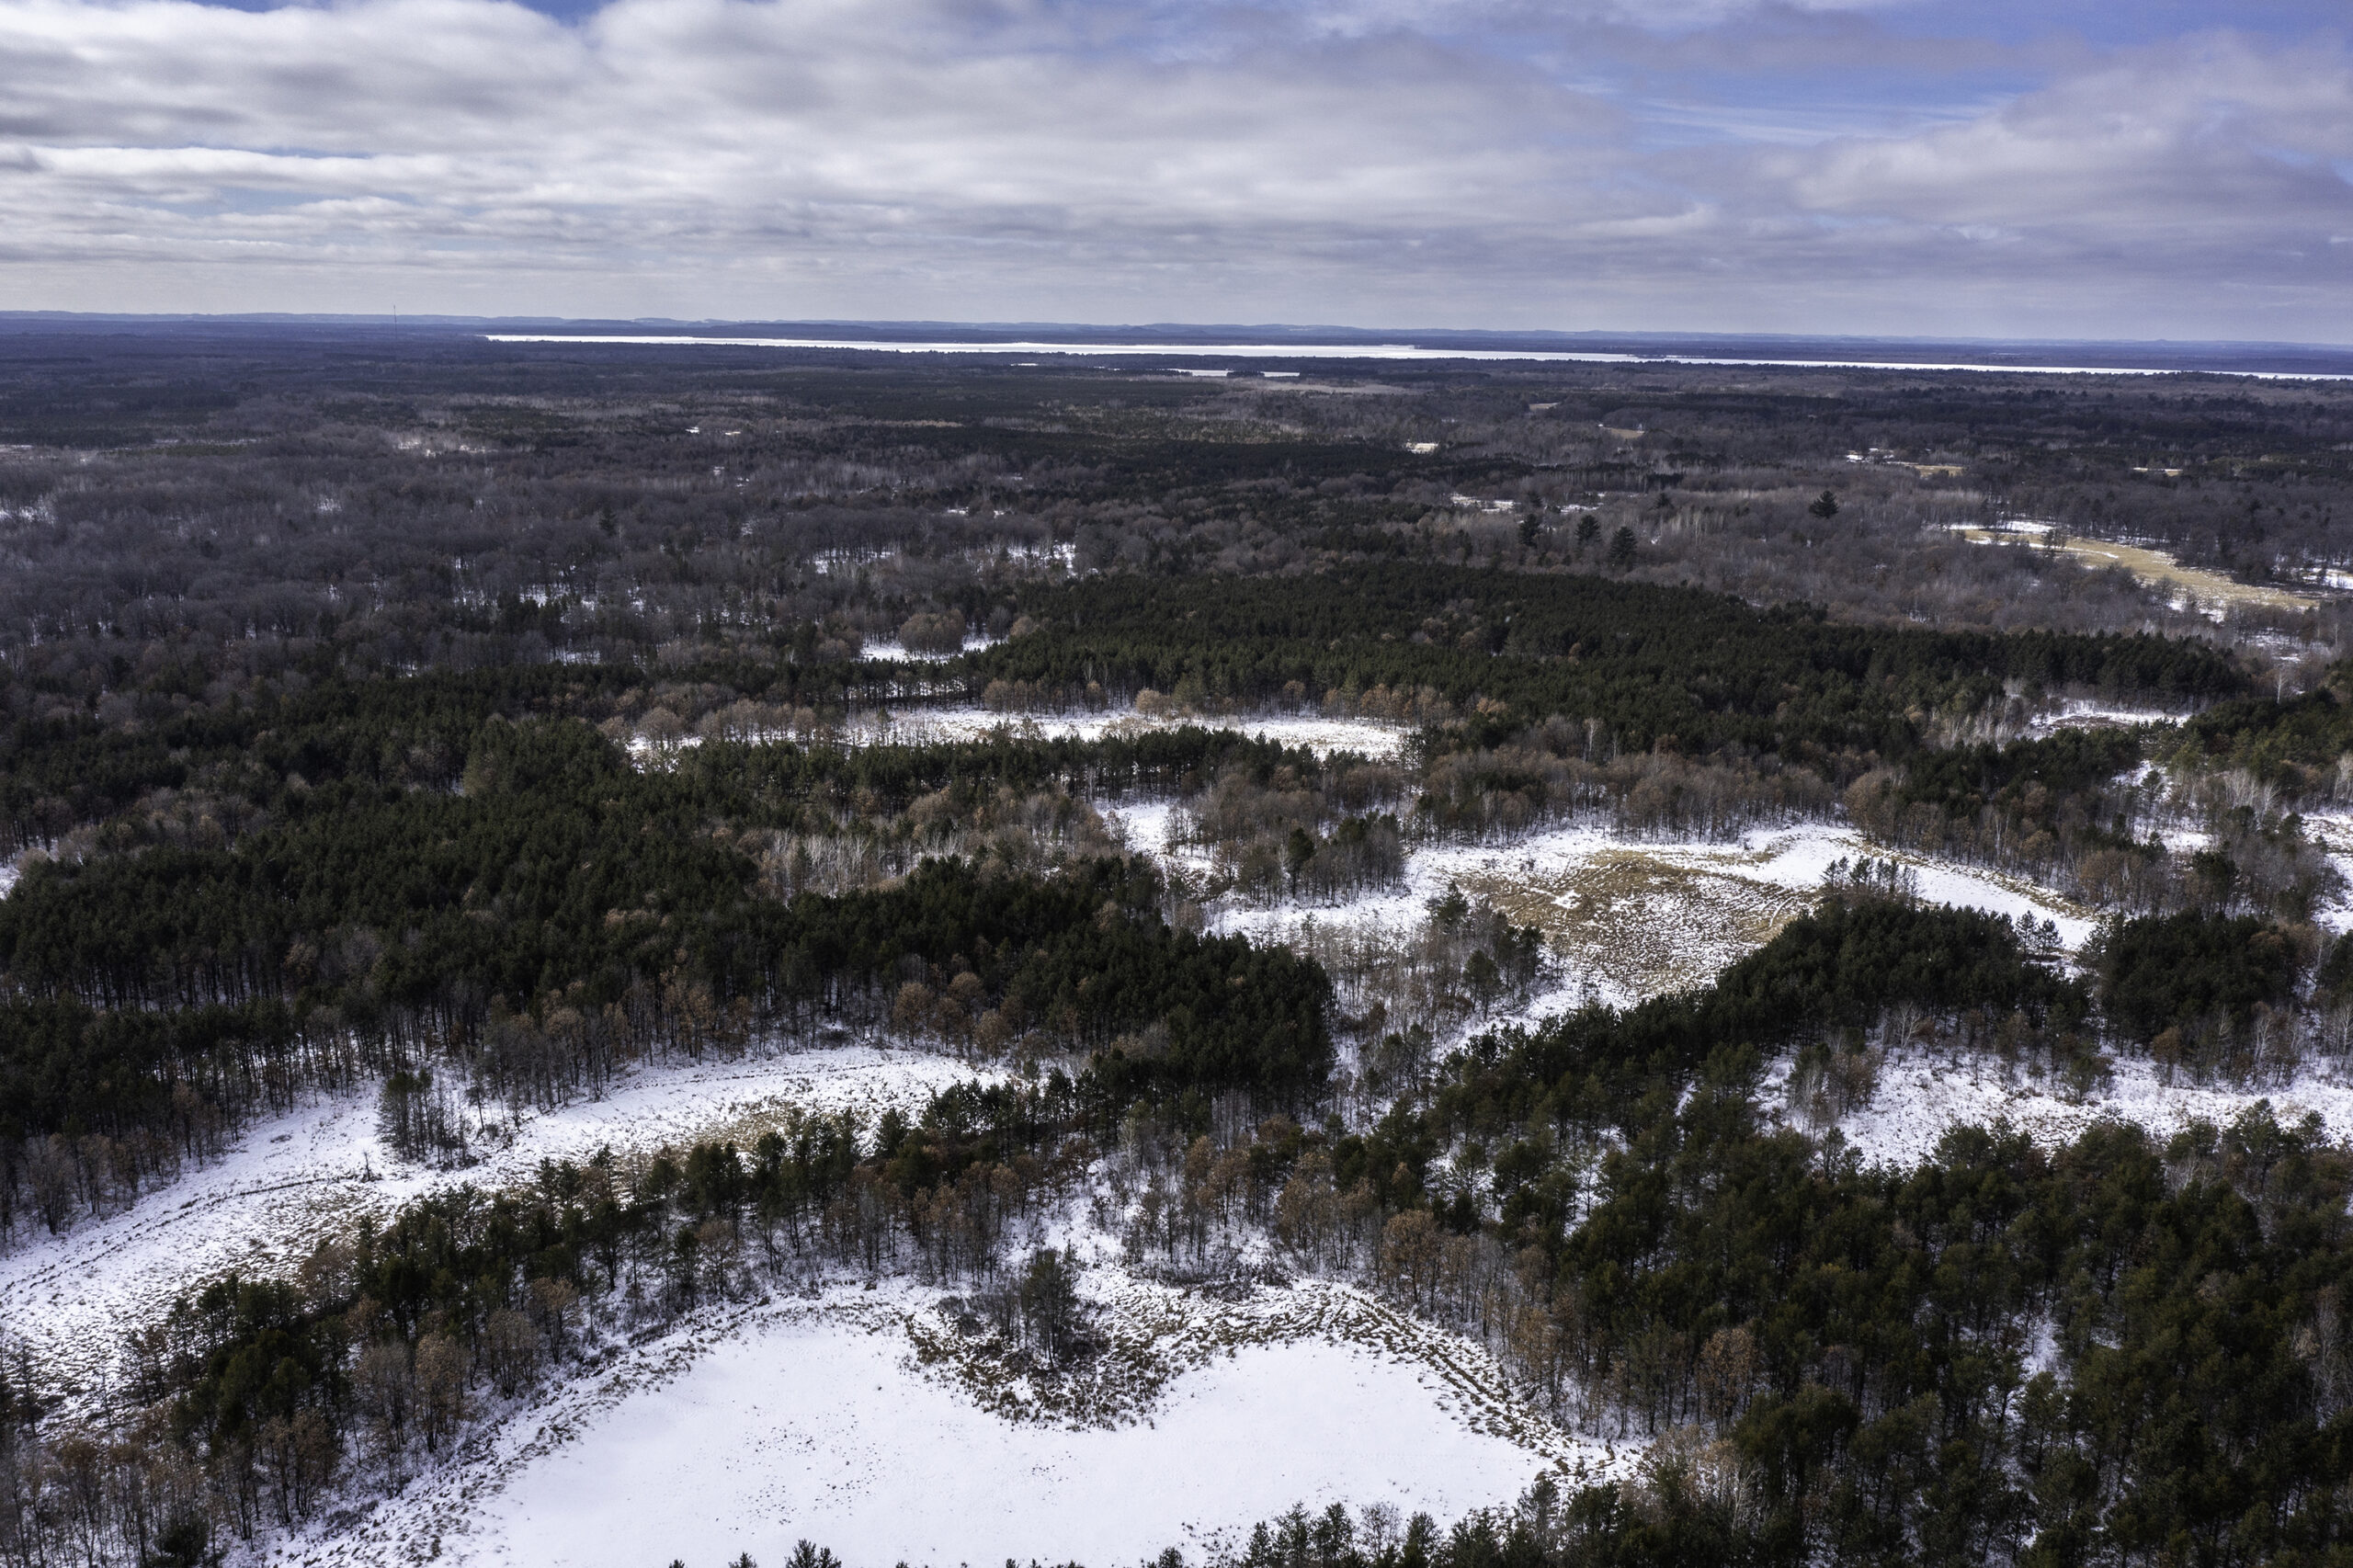 A conservation group aims to use its purchase of more than 3,000 acres of central Wisconsin forest land to increase biodiversity and preserve wetlands. 